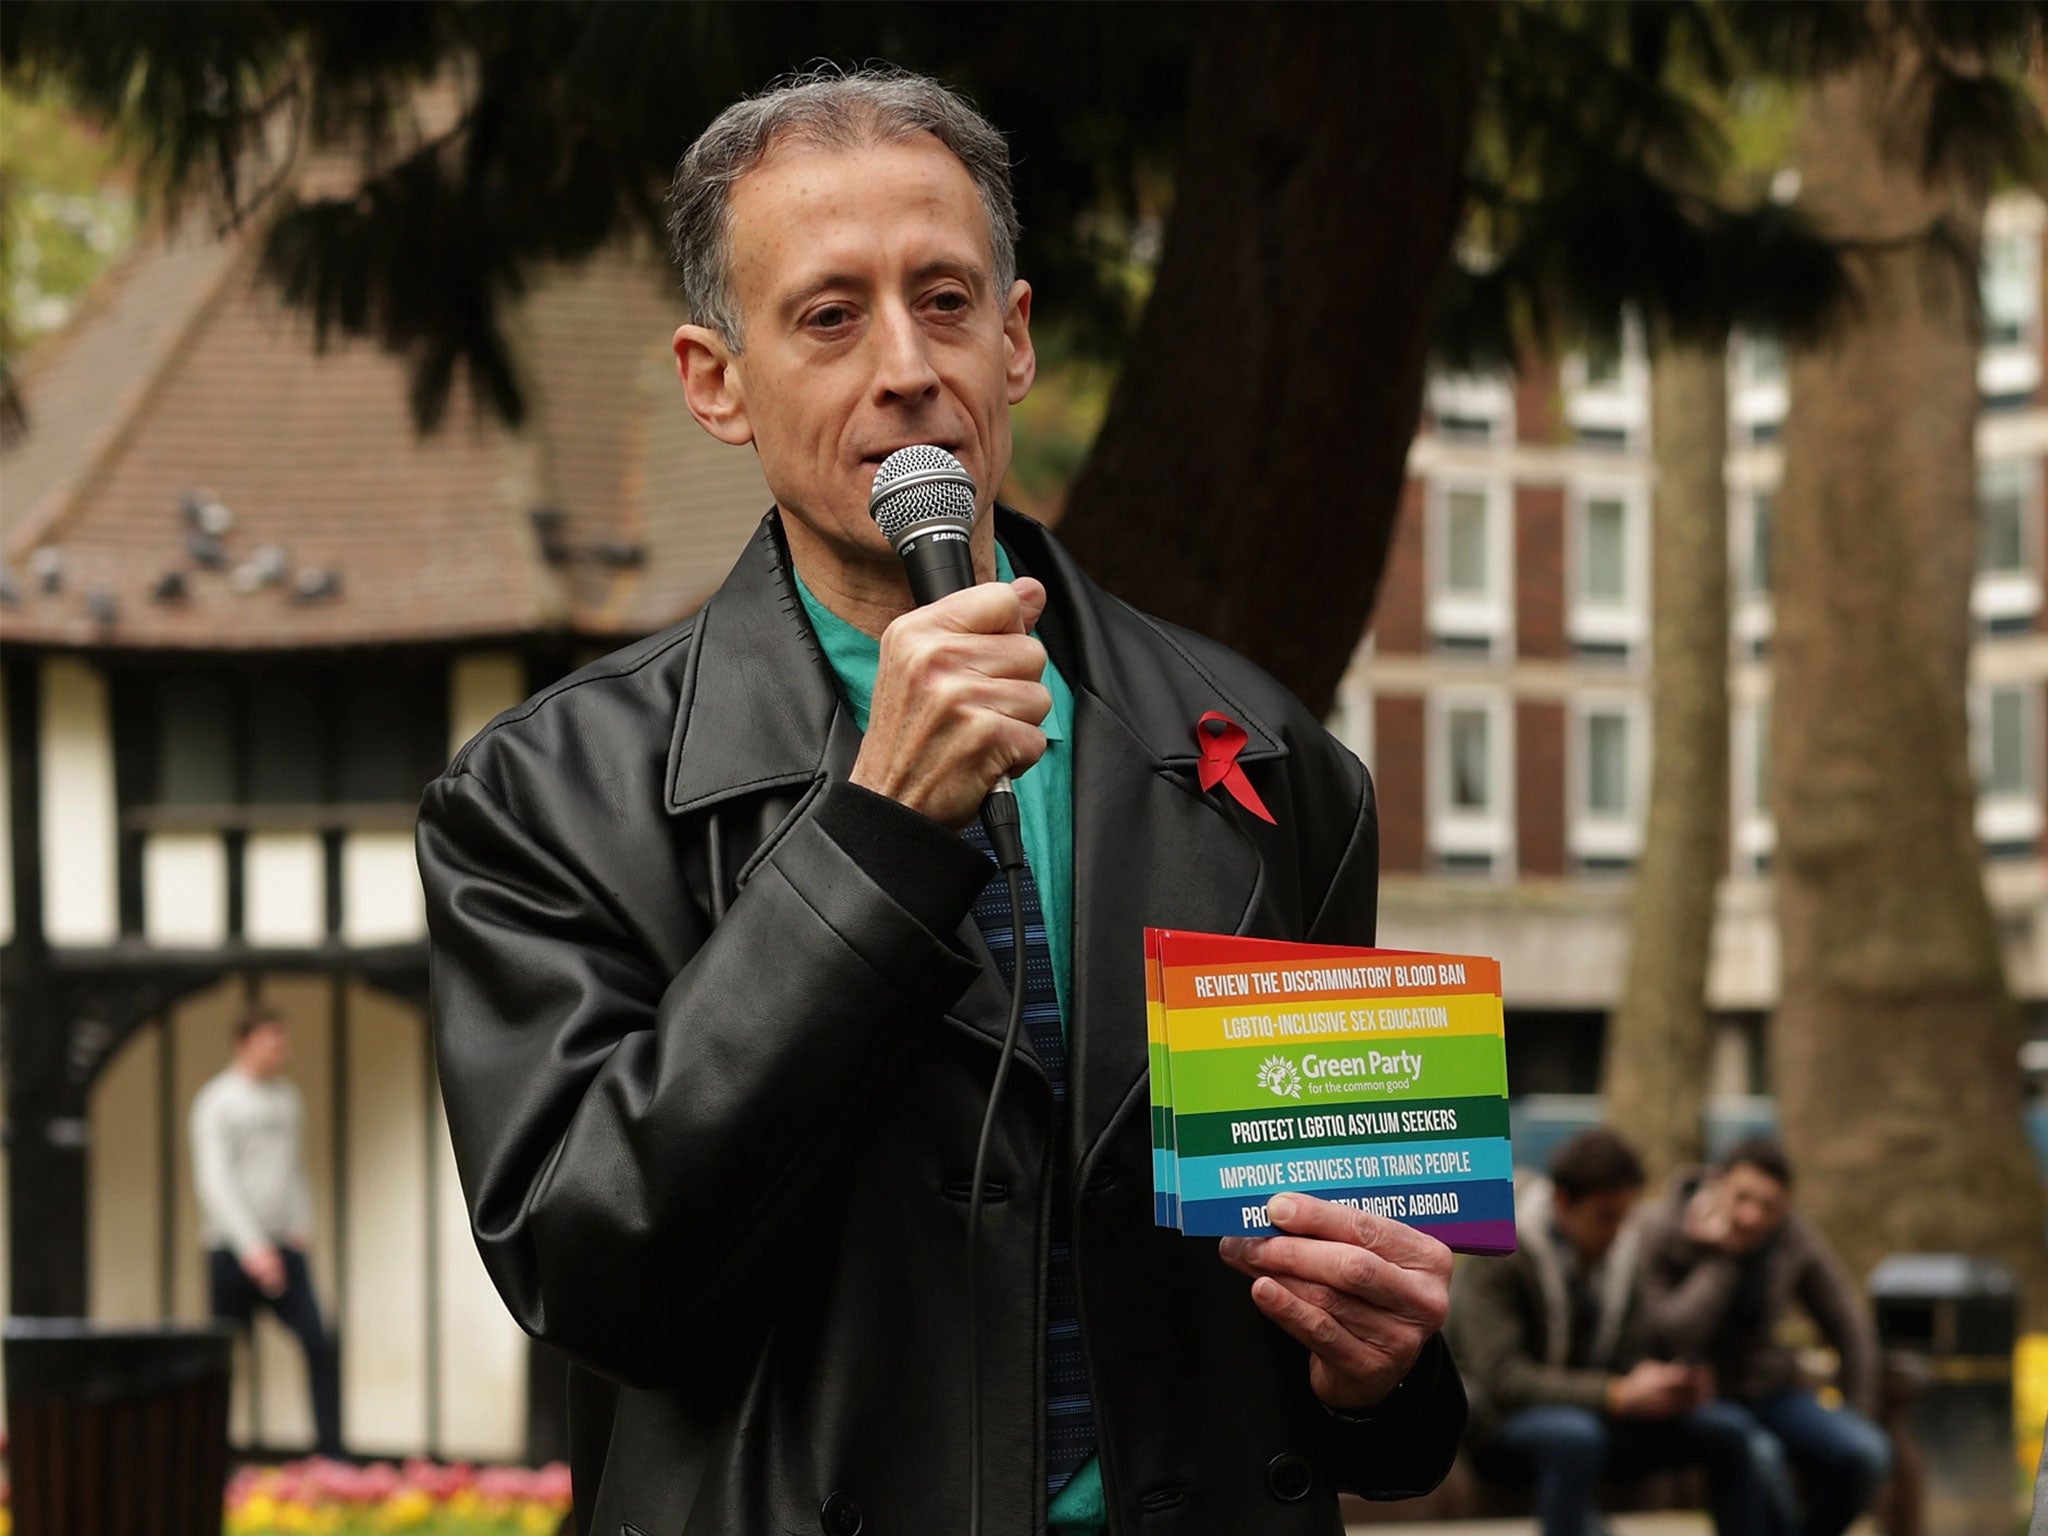 Peter Tatchell says Theresa May has not done enough to promote LGBT rights